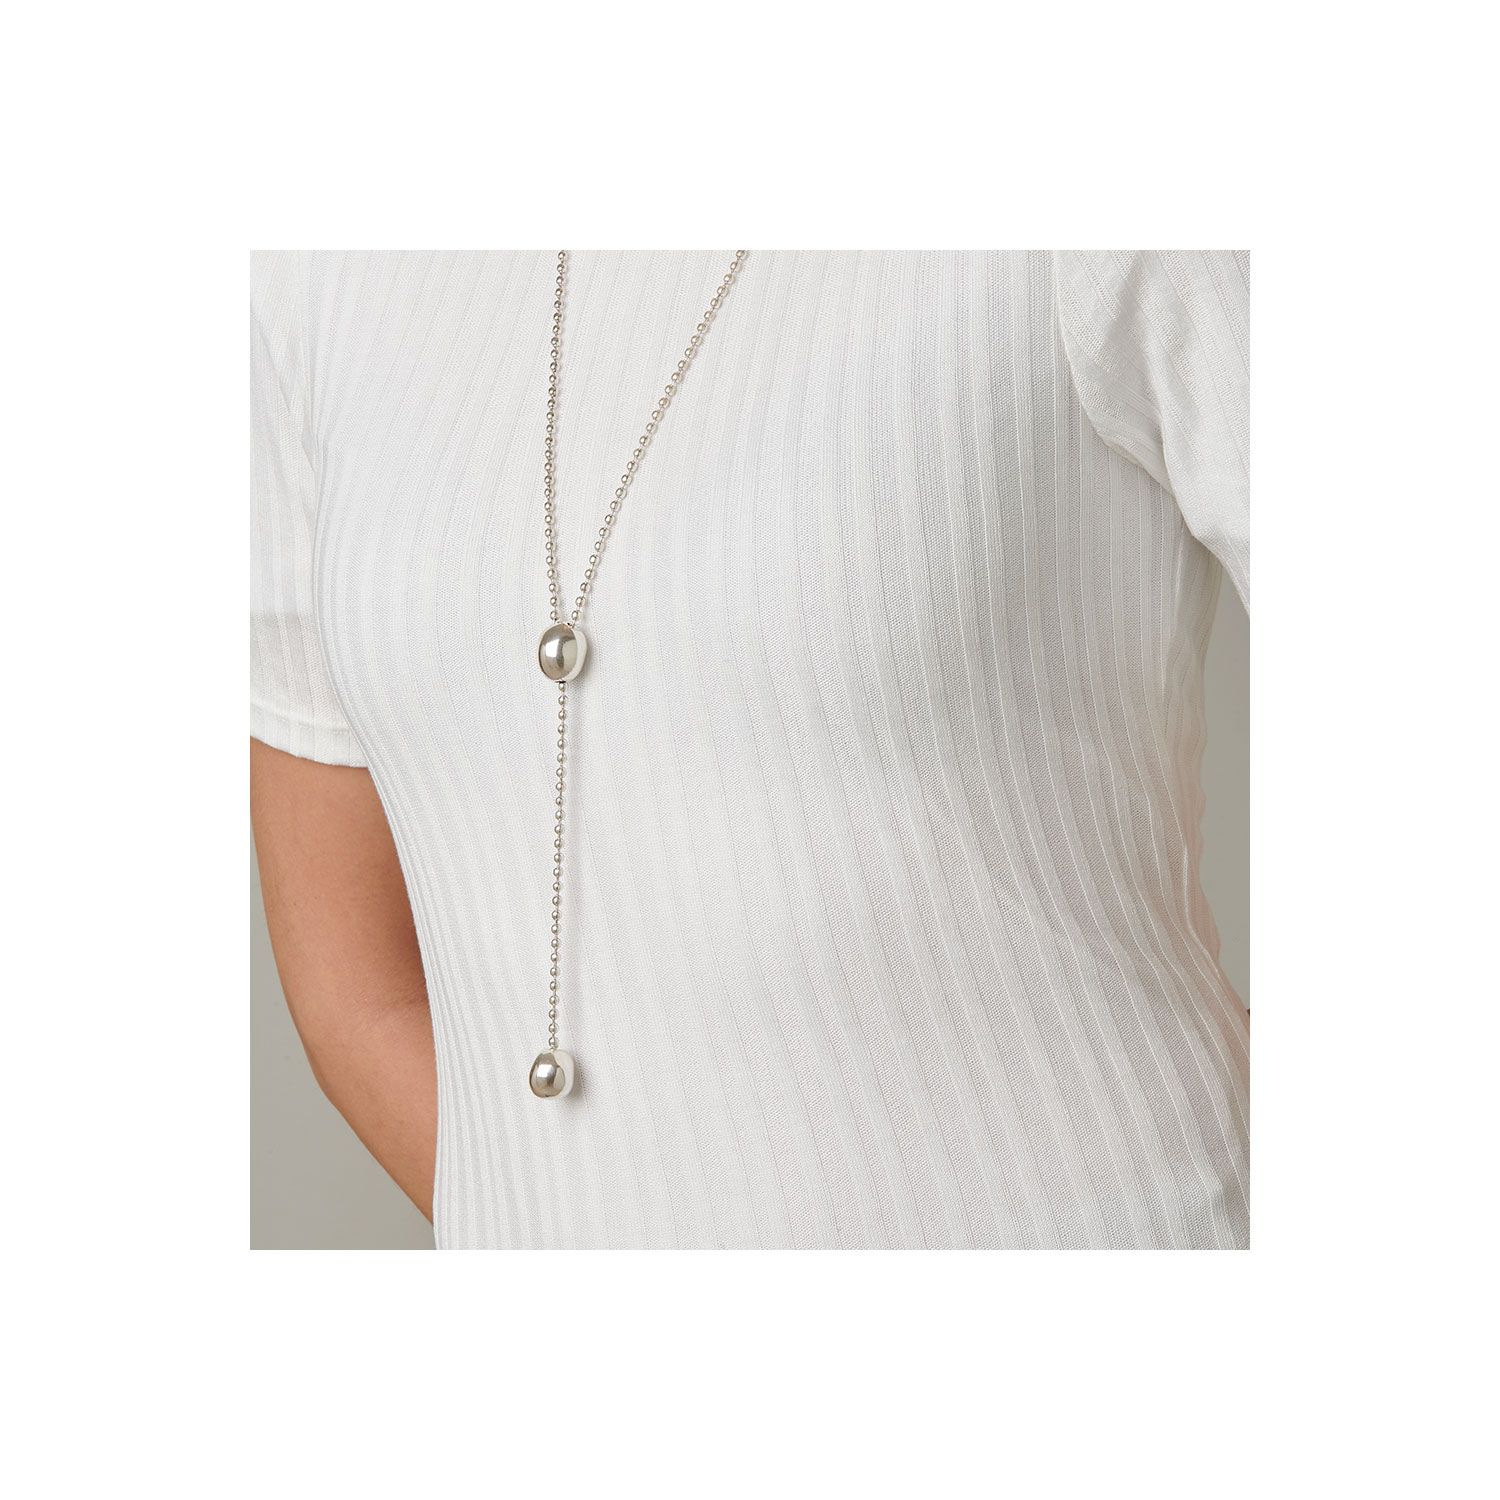 UNO DE 50 UNOde50 - Lonely Planet Necklace available at The Good Life Boutique